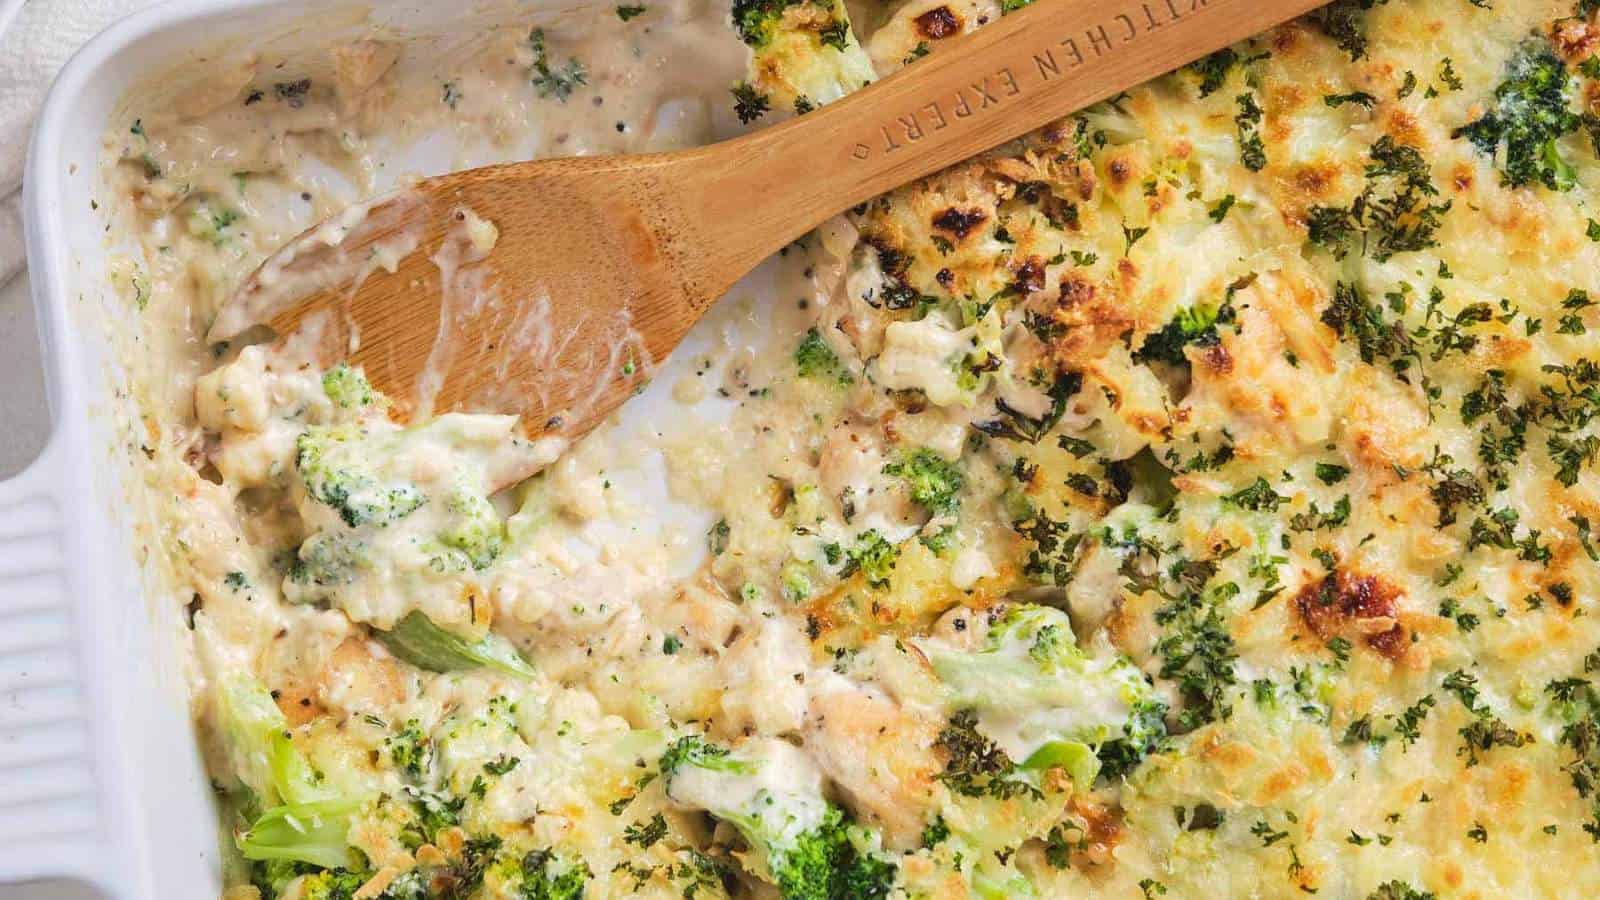 A wooden spoon scooping chicken broccoli Alfredo casserole out of a serving dish.